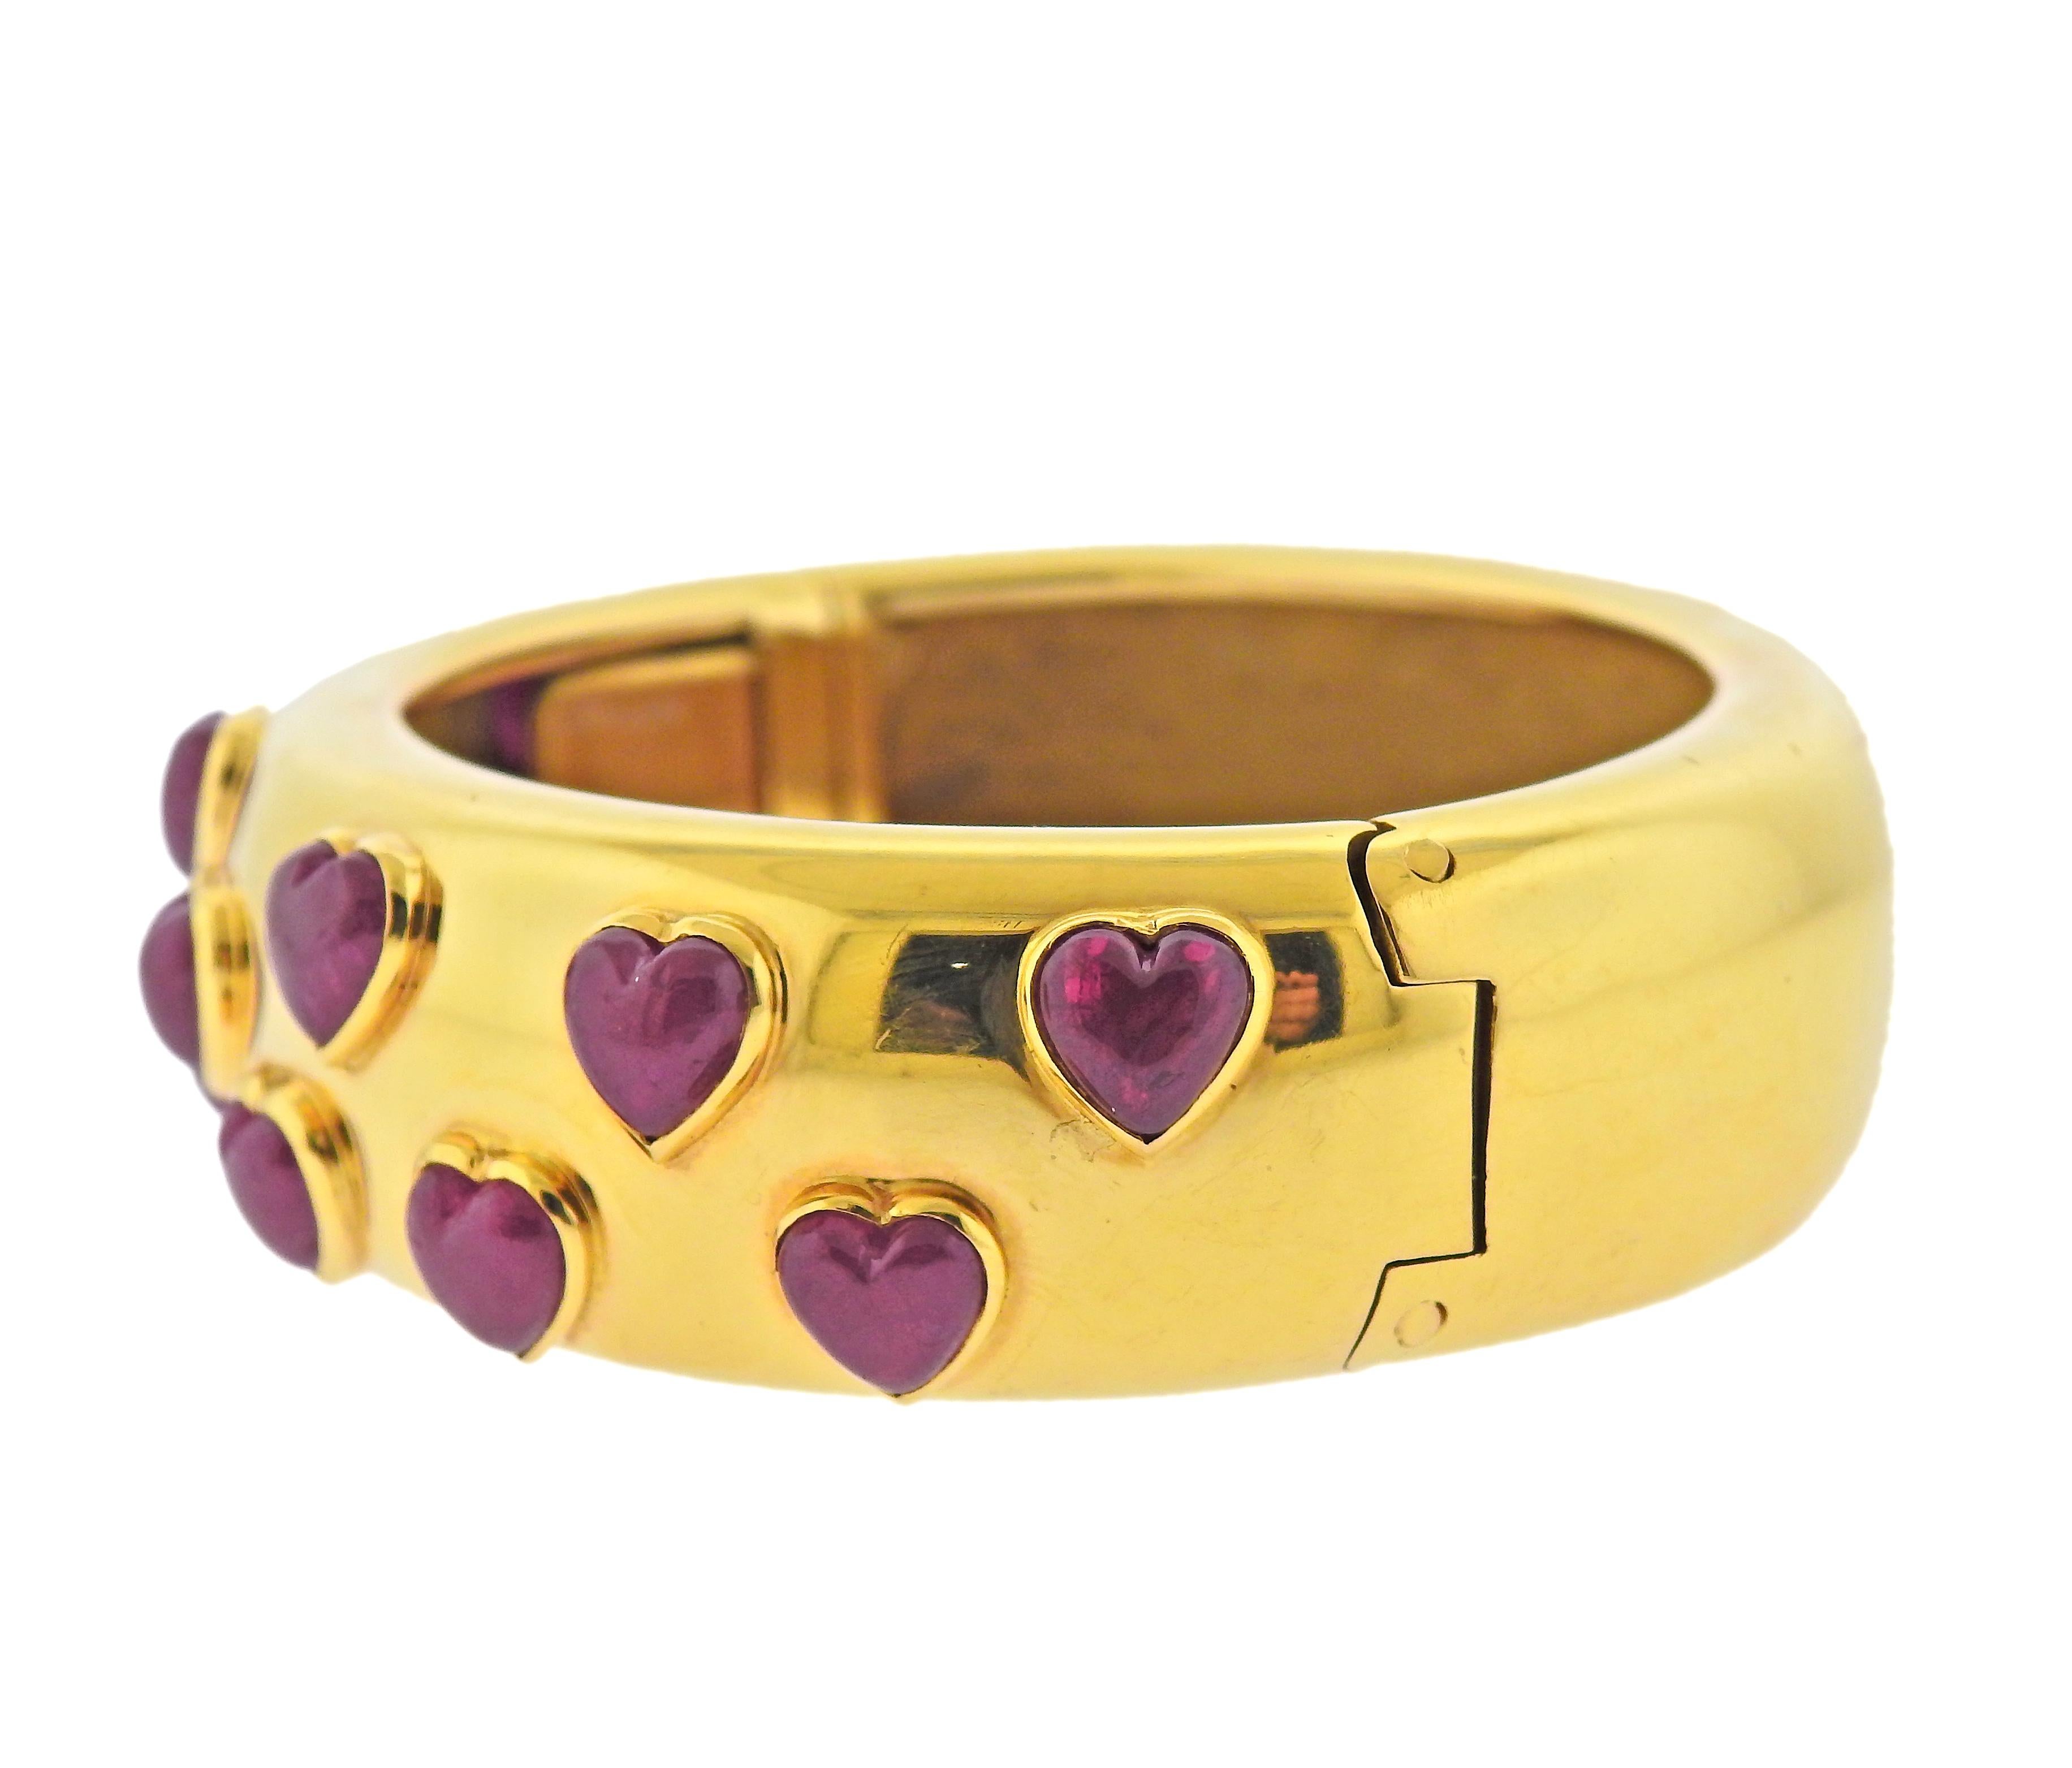 Poiray France 18k yellow gold bangle bracelet with heart shaped ruby cabochons. Bracelet will fit approx. 7